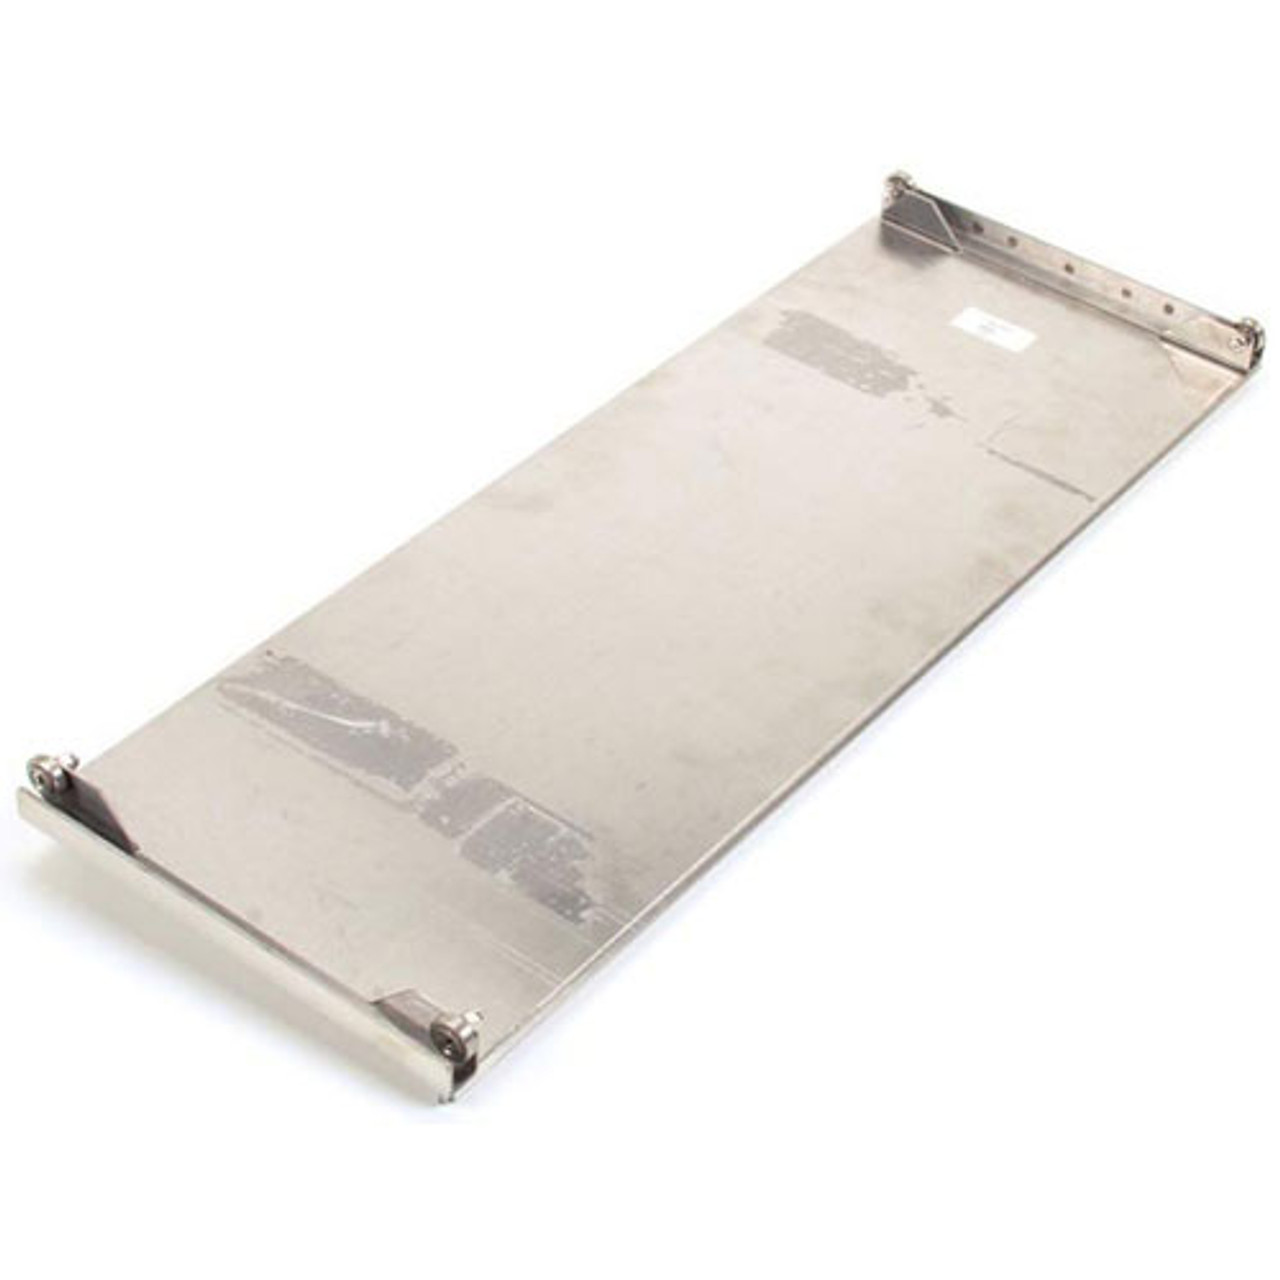 Silver King 62393 - Assy Cover Frnt Skmf34